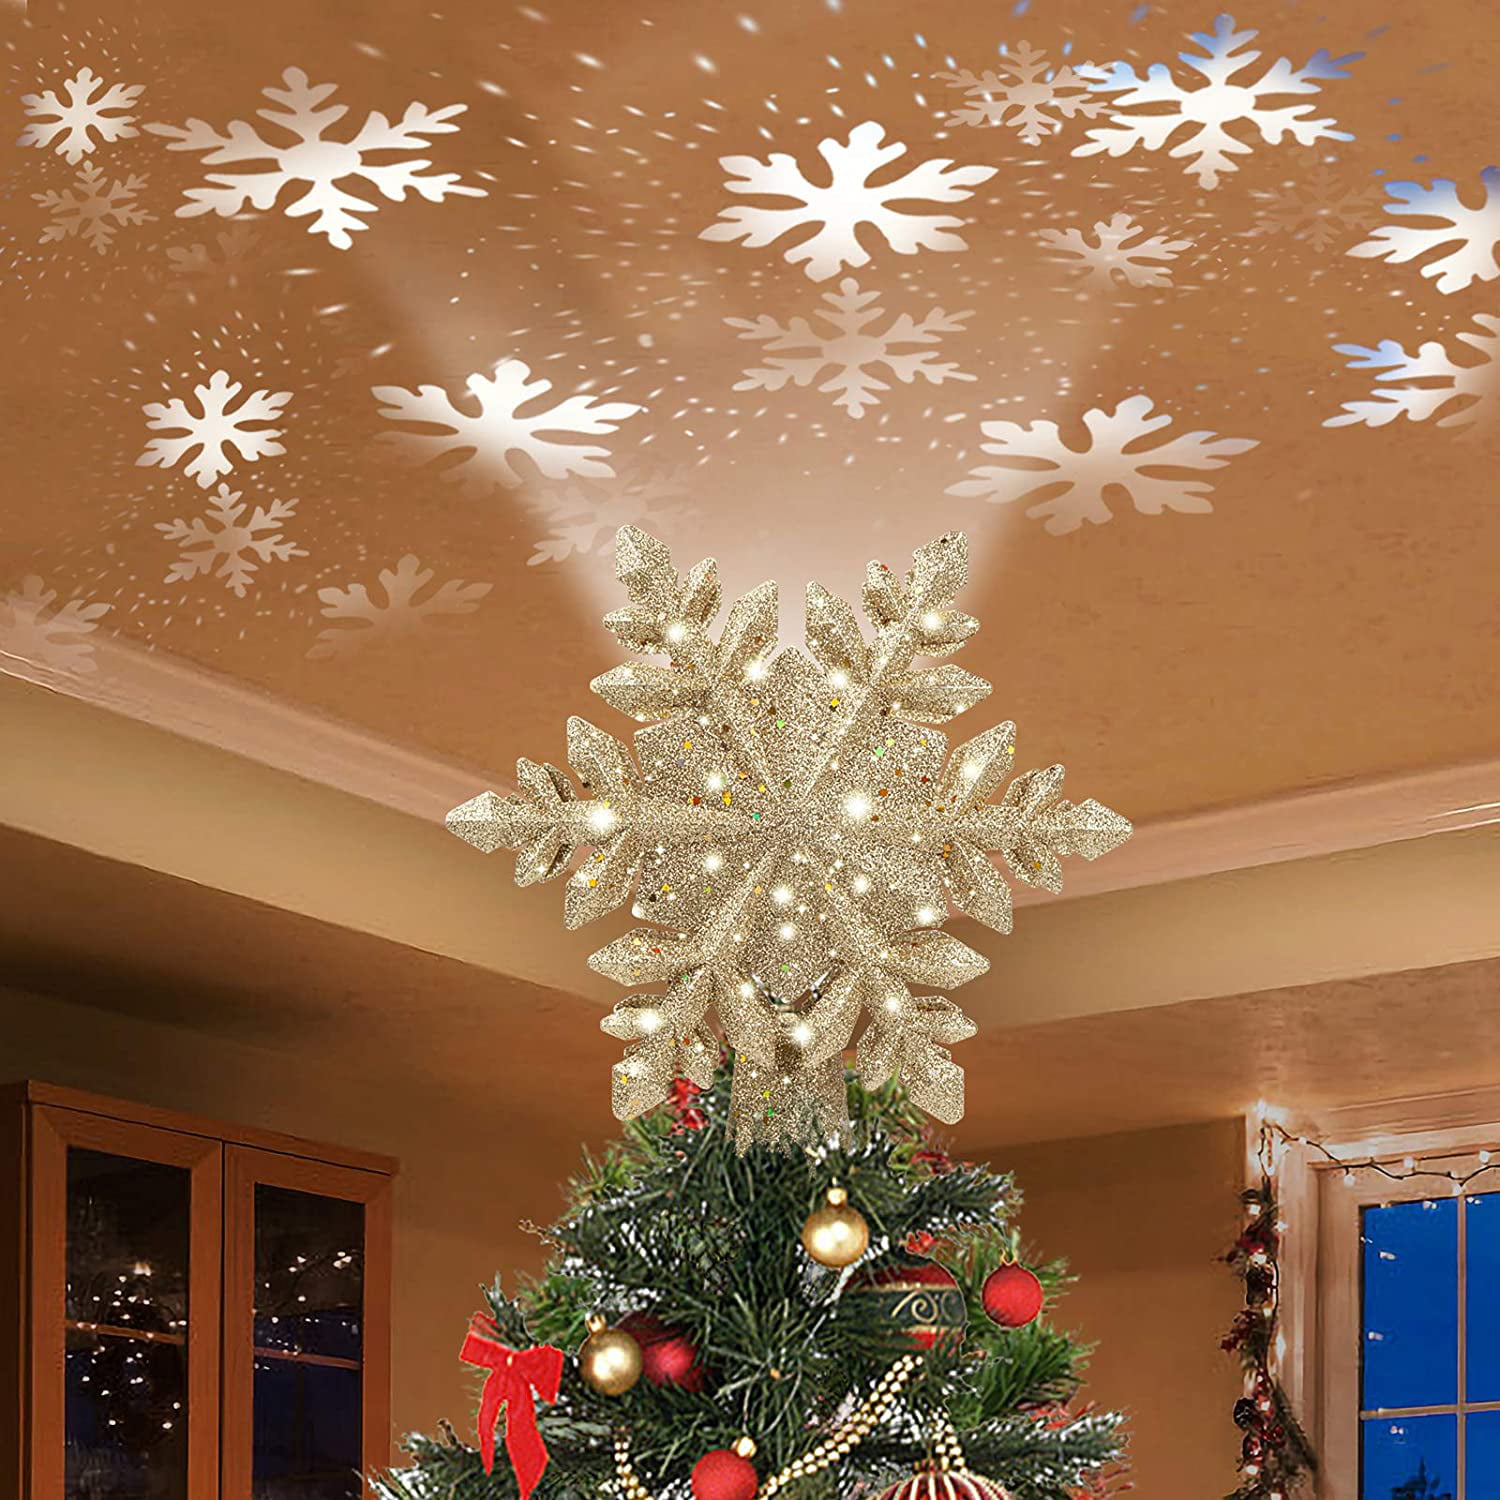 ALLOMN Christmas Lighting Christmas Tree Topper Projector Light 3D Glitter Lighted Star Tree Topper with Adjustable LED Snowstorm/Snowman/Stripe RGB Projector Lights 3m Cable UK Plug Snowstorm